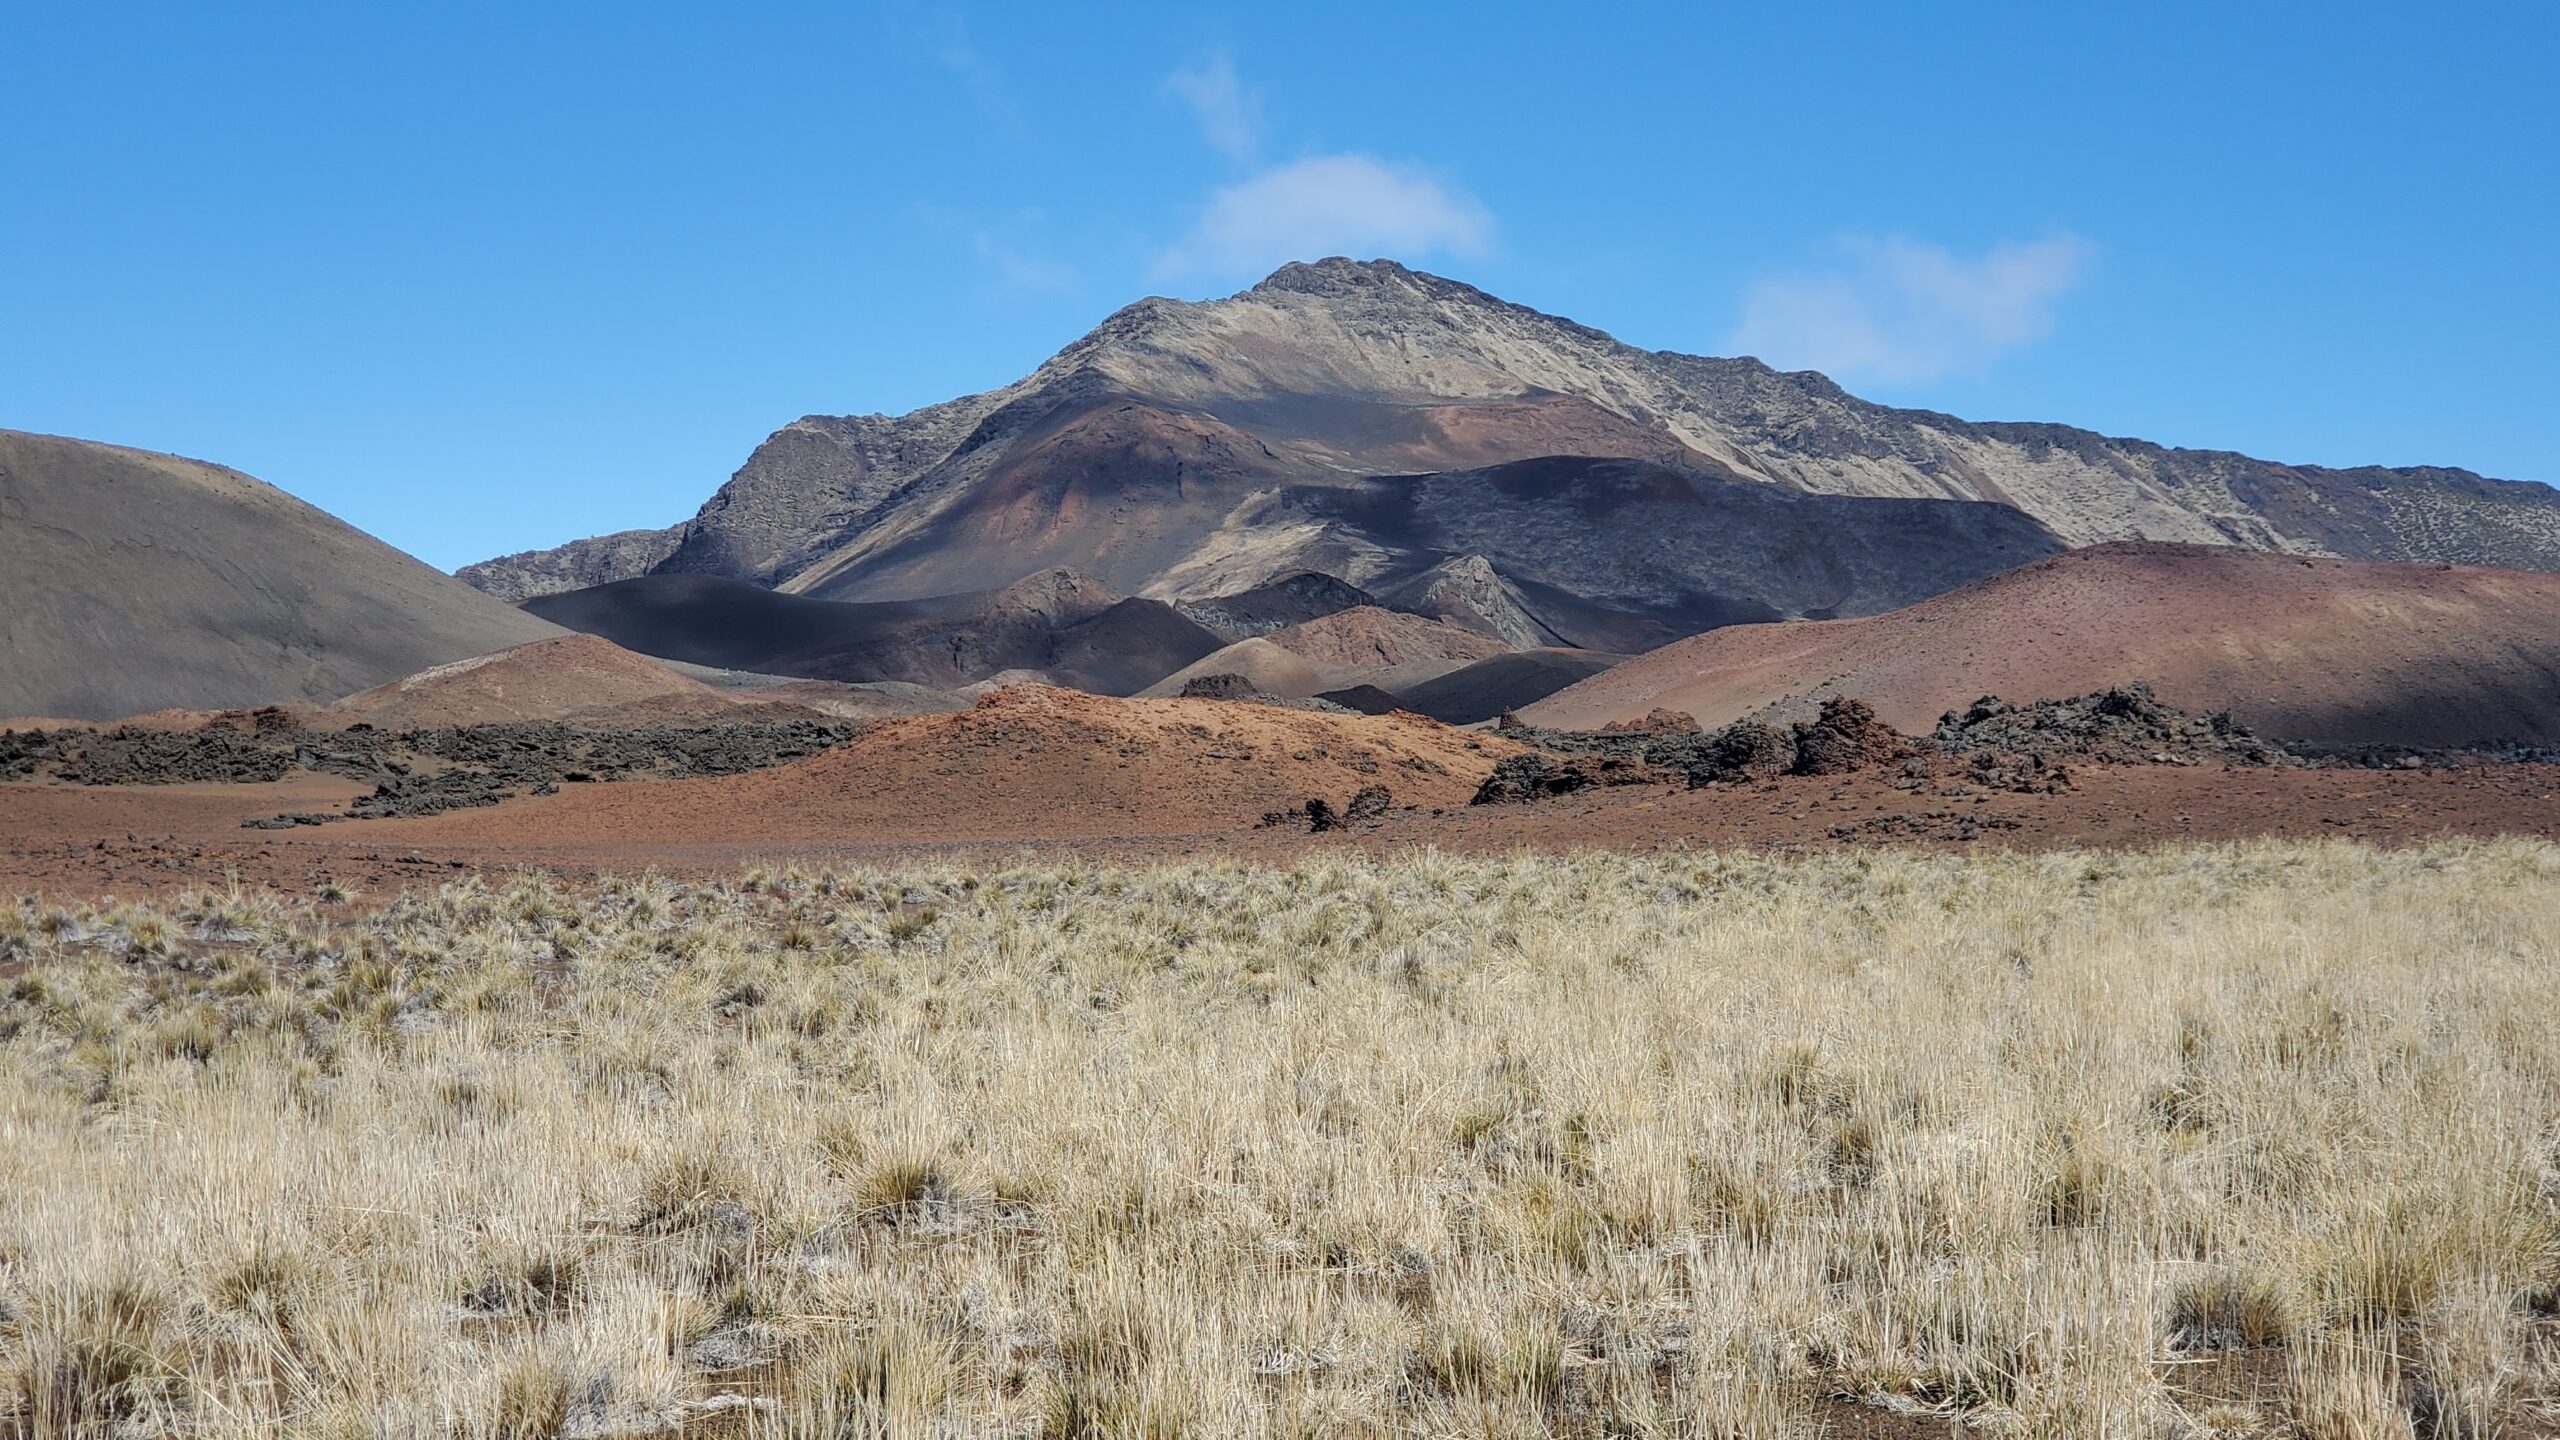 Short, dried grasses growing at the base of barren red-orange and grey cinder cones